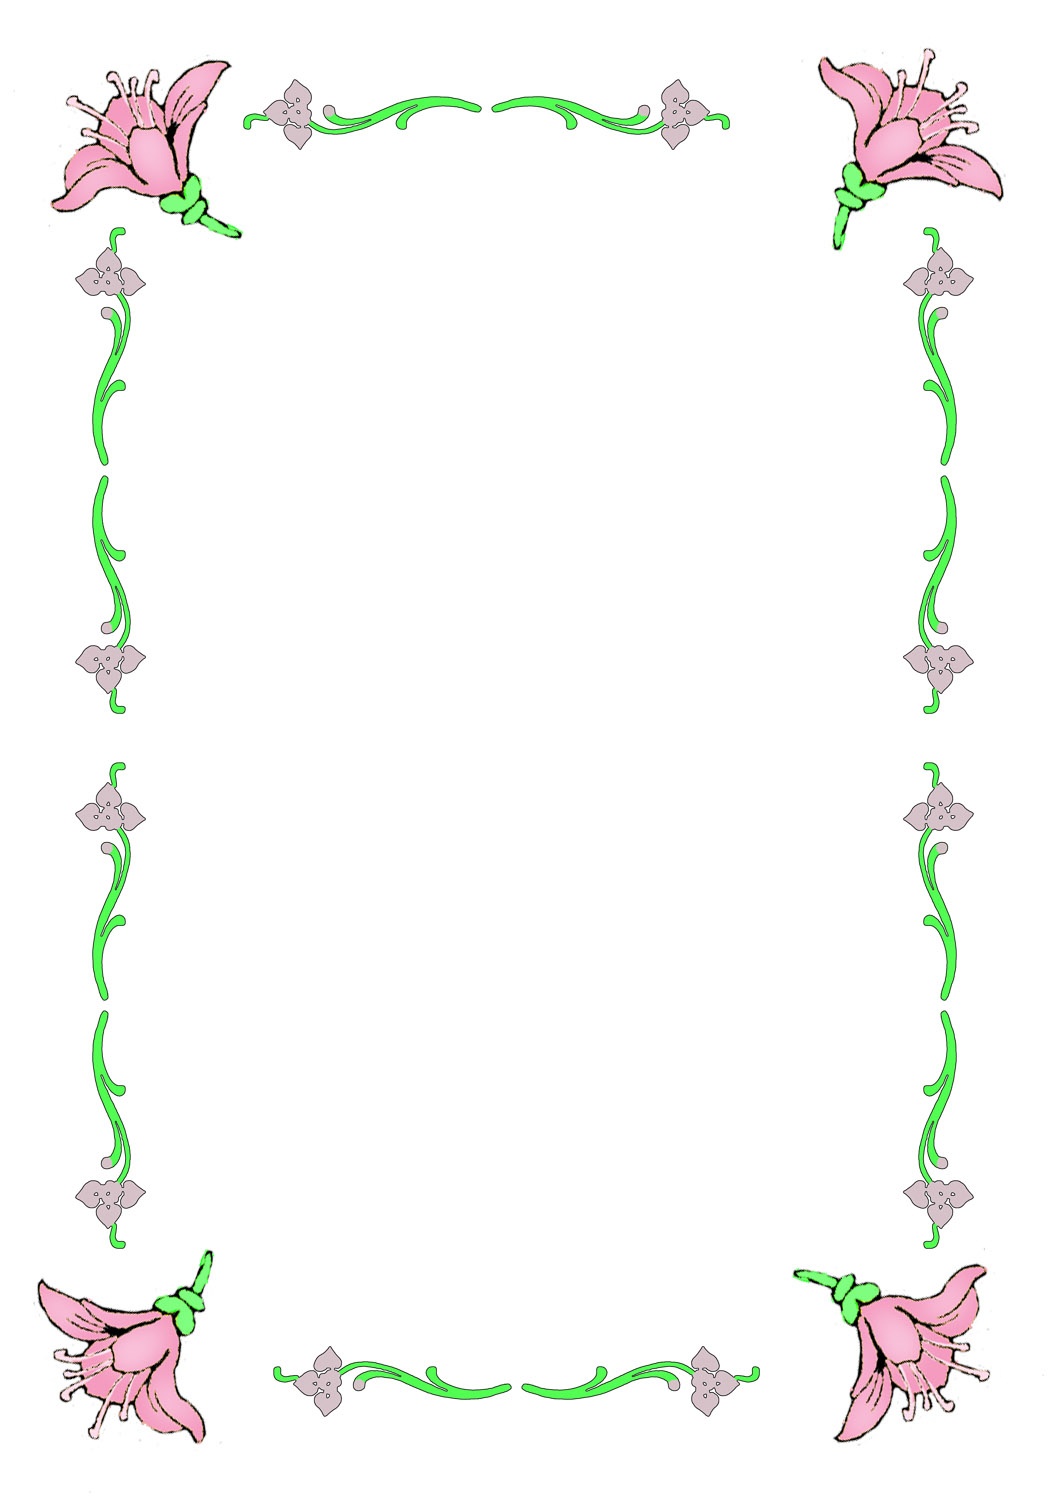 Free Printable Borders For Easter - Free Printable Borders For Cards